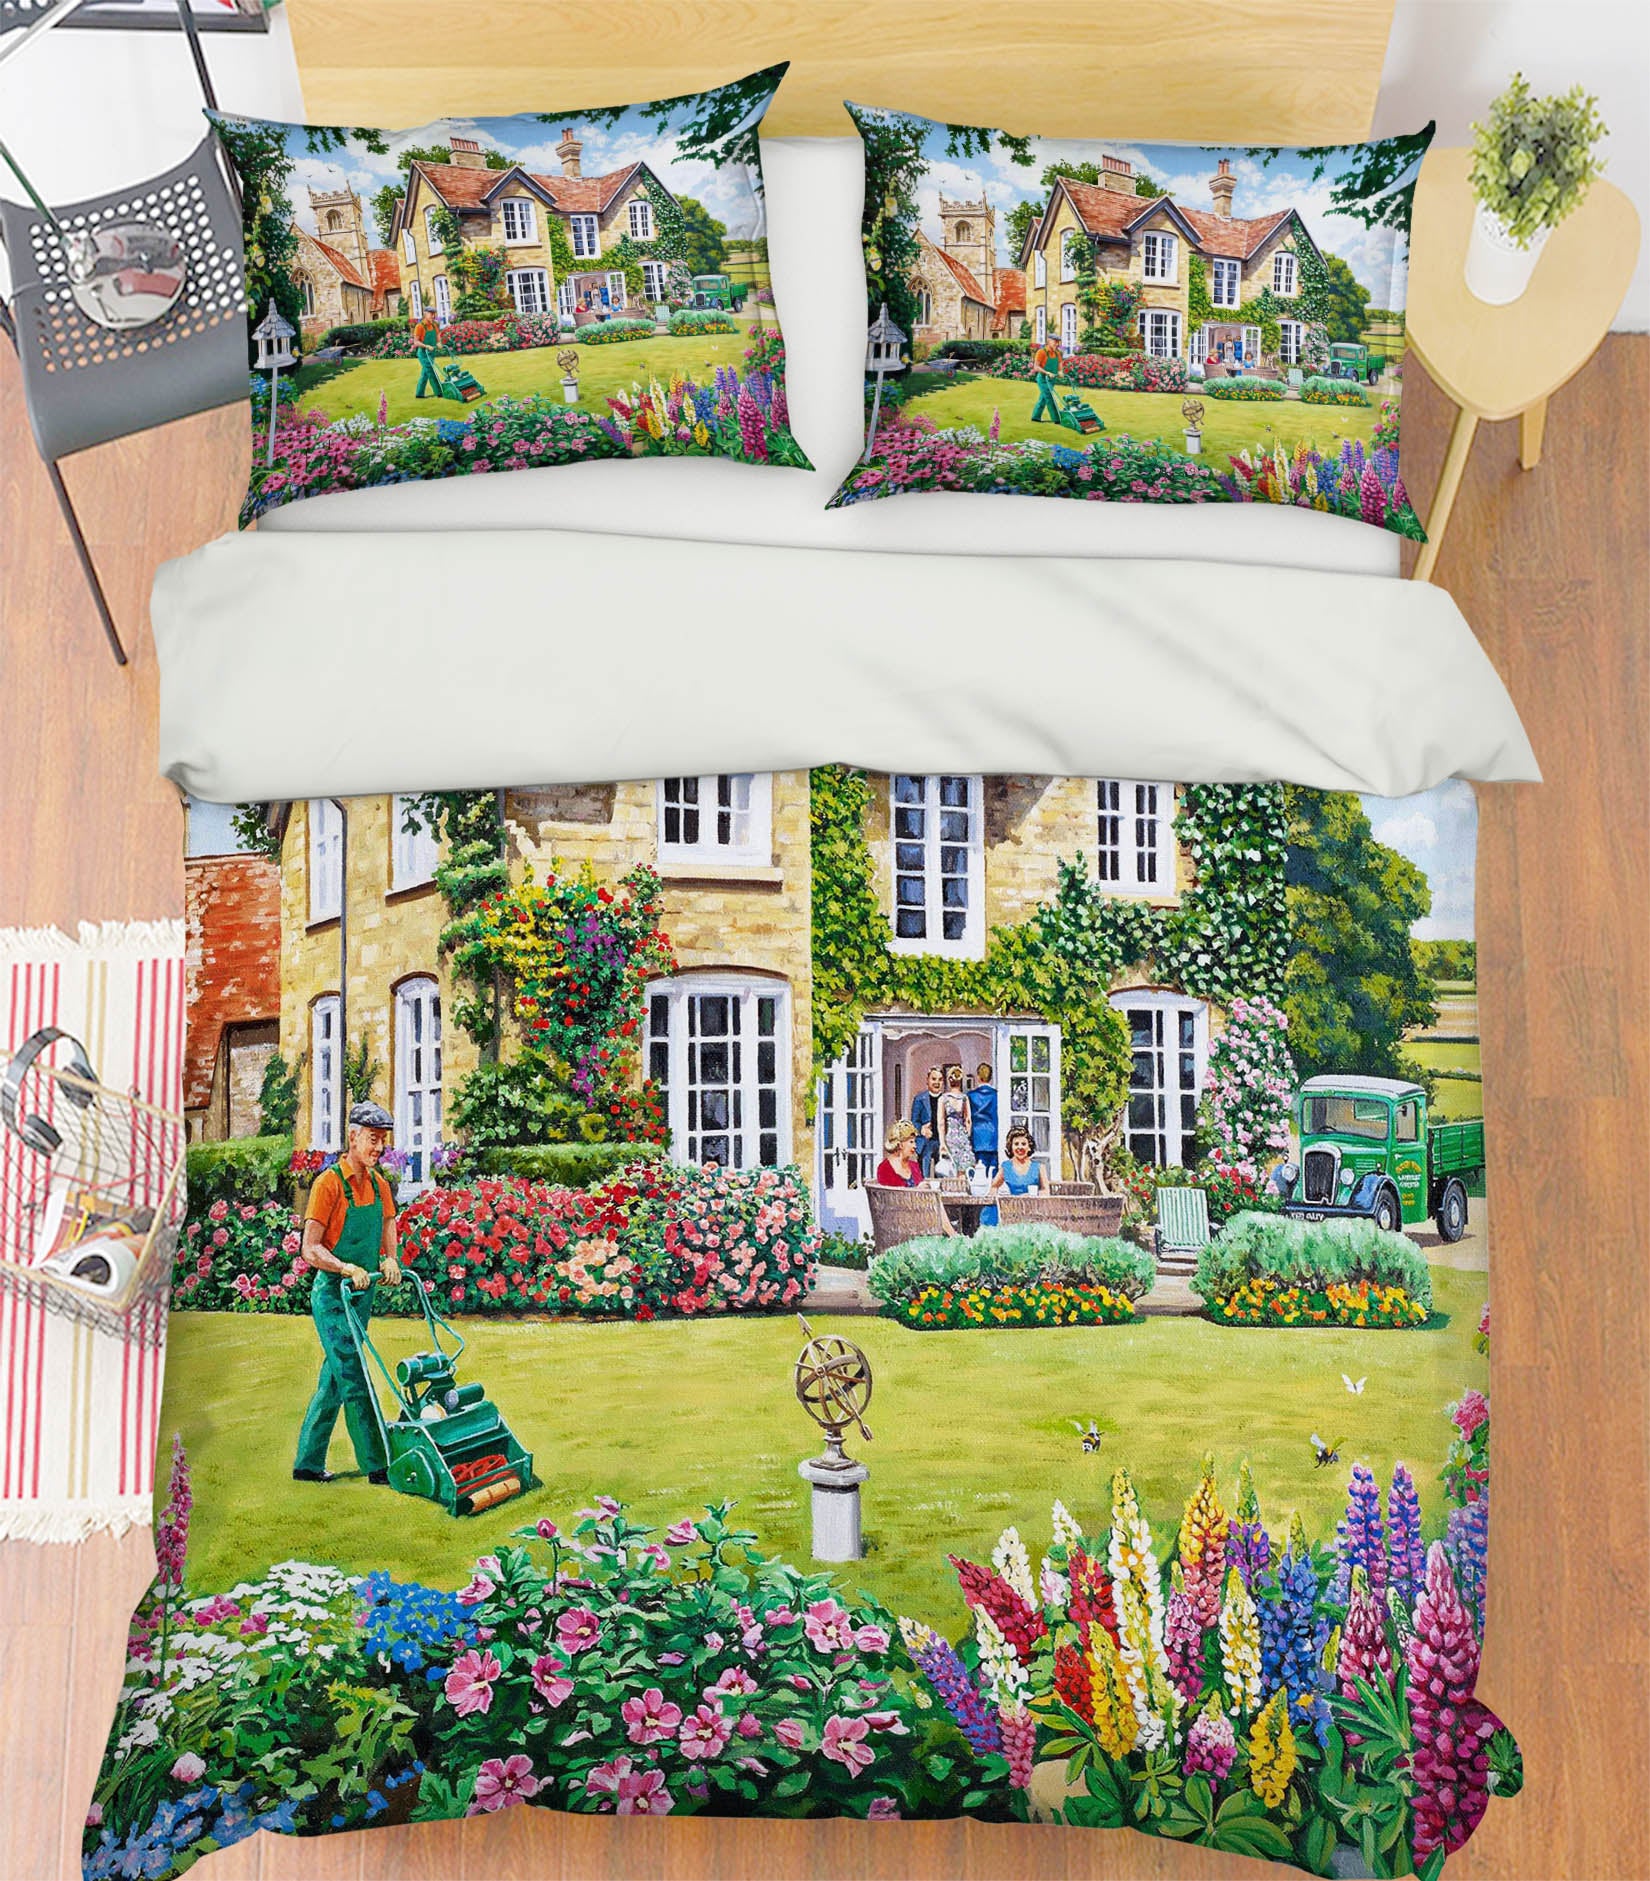 3D The Vicarage 2070 Trevor Mitchell bedding Bed Pillowcases Quilt